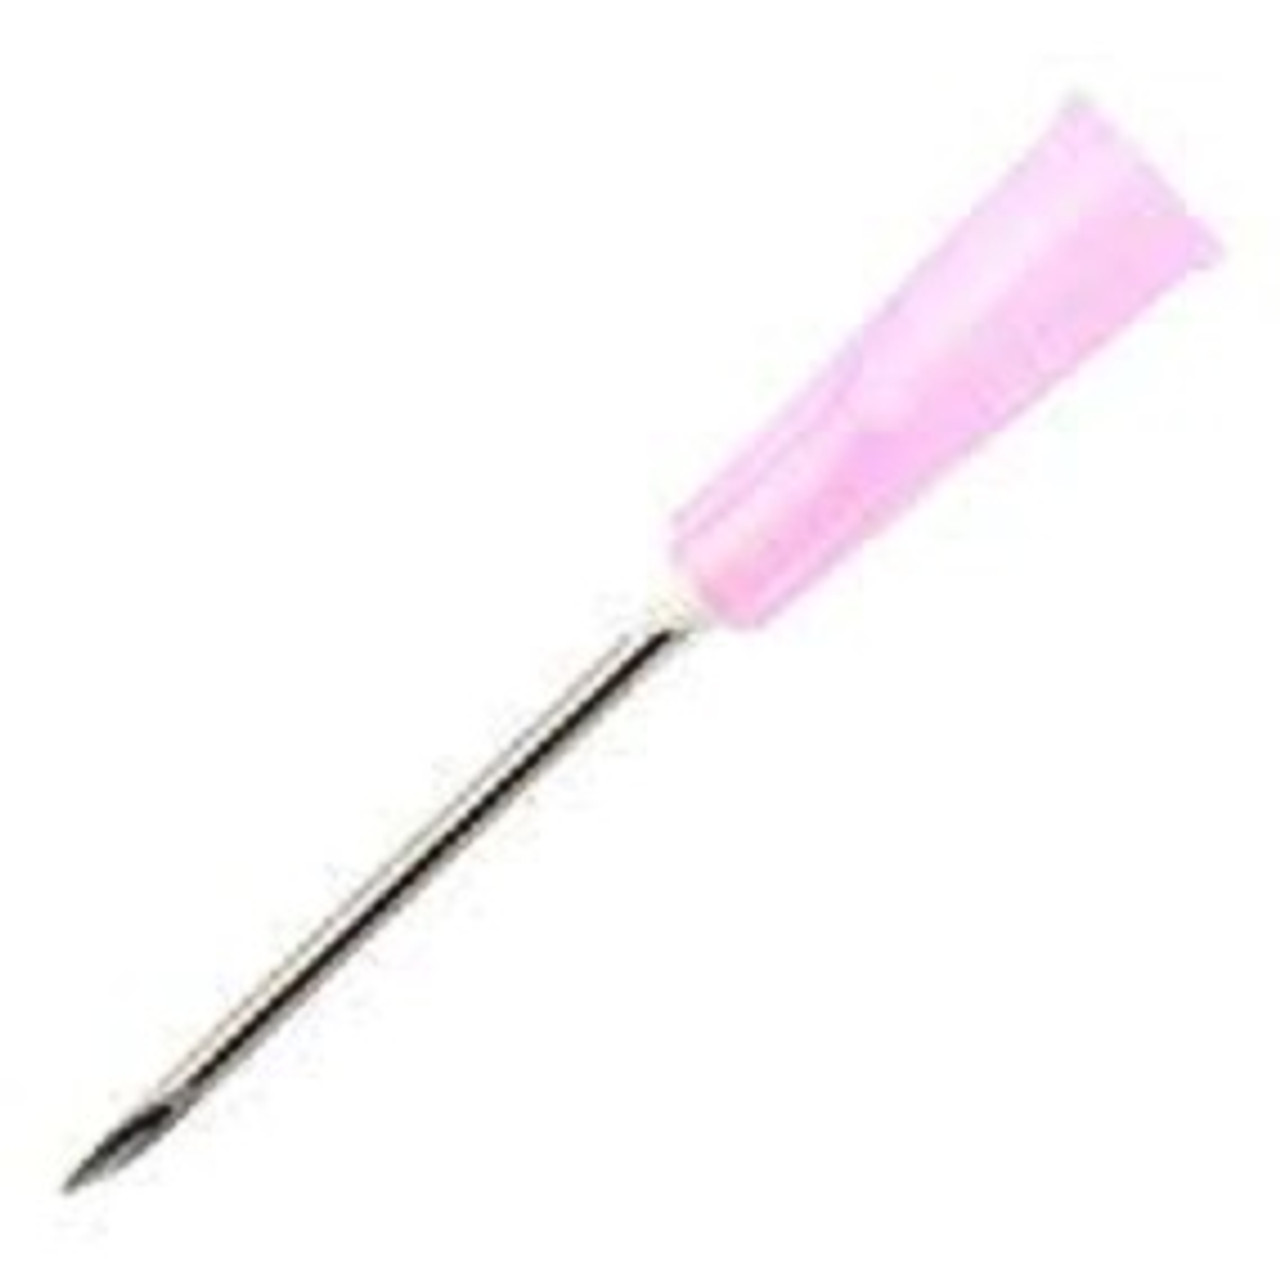 BD 305185 fill sterile hypodermic needle - 18 G x 1.5" BX/100